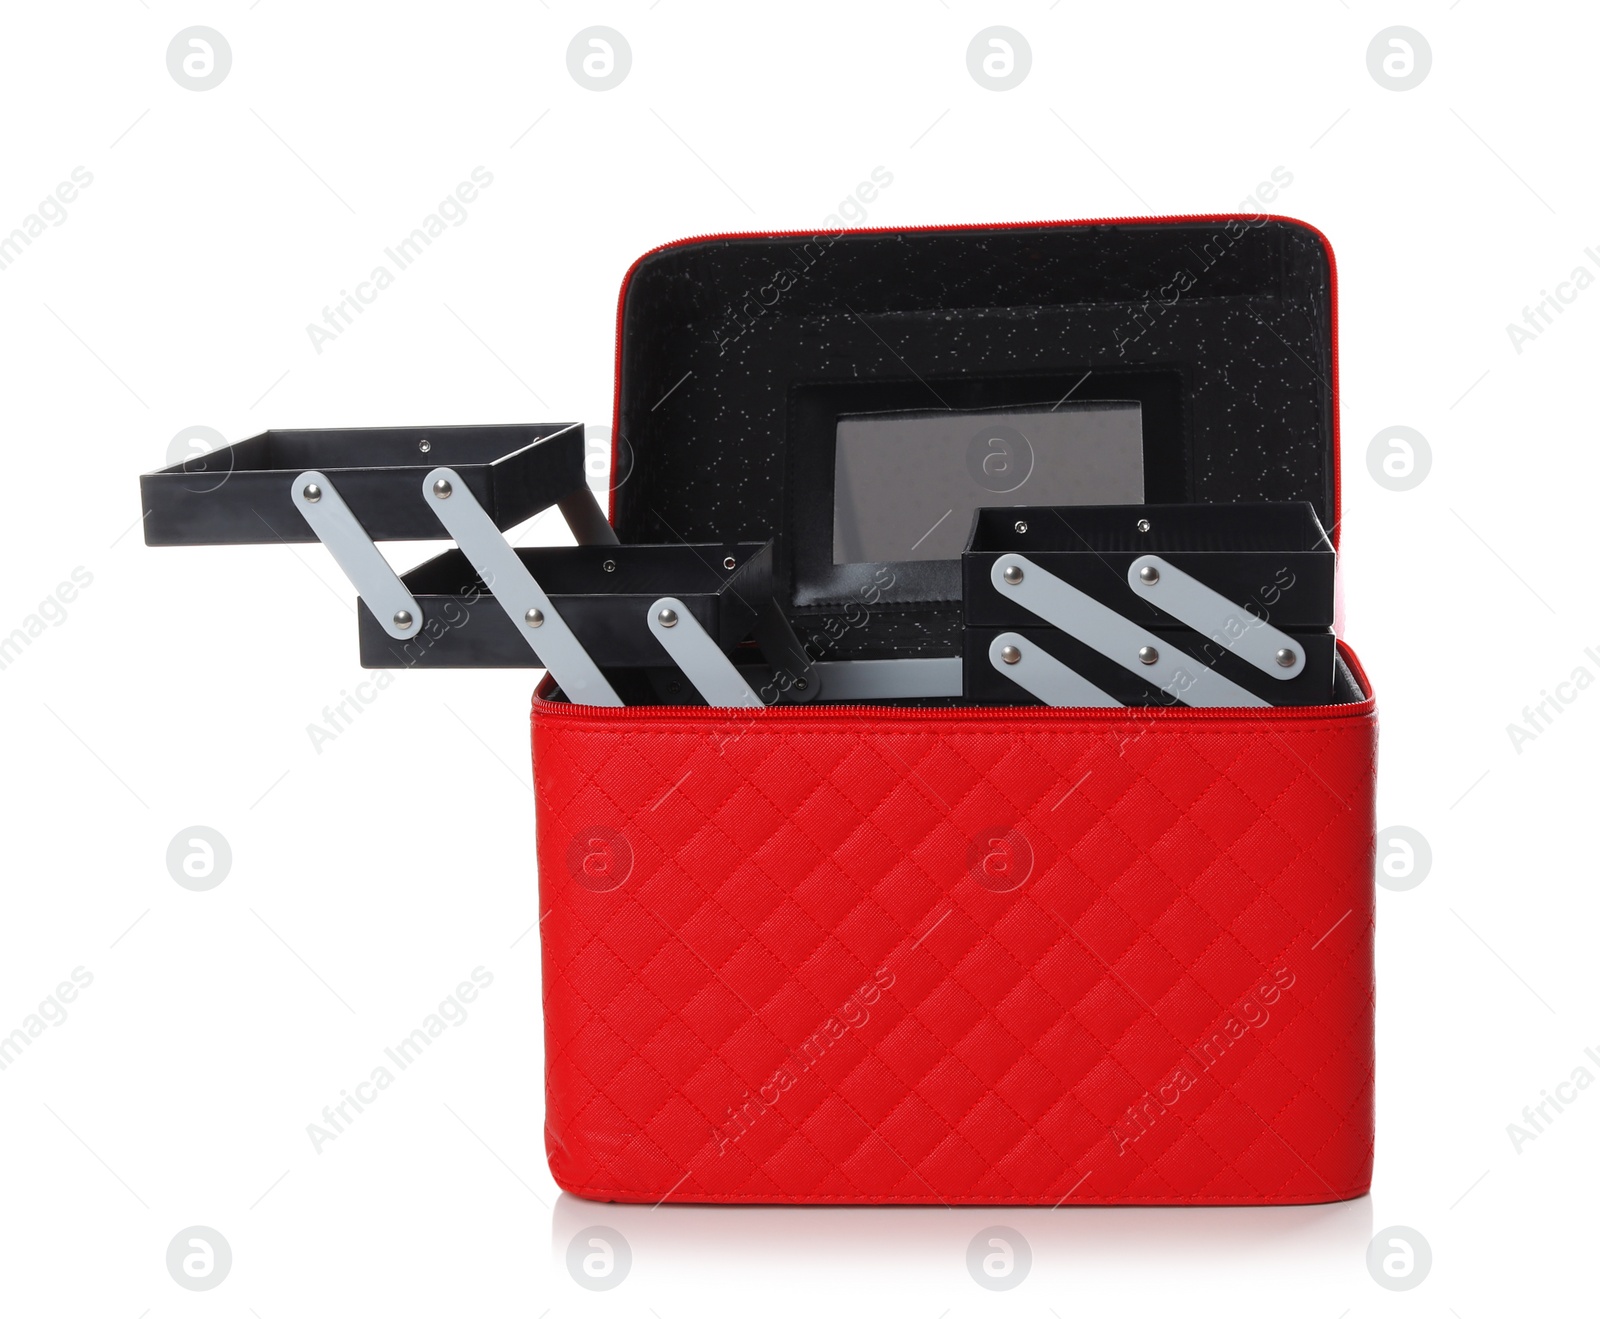 Photo of Stylish case for makeup products on white background